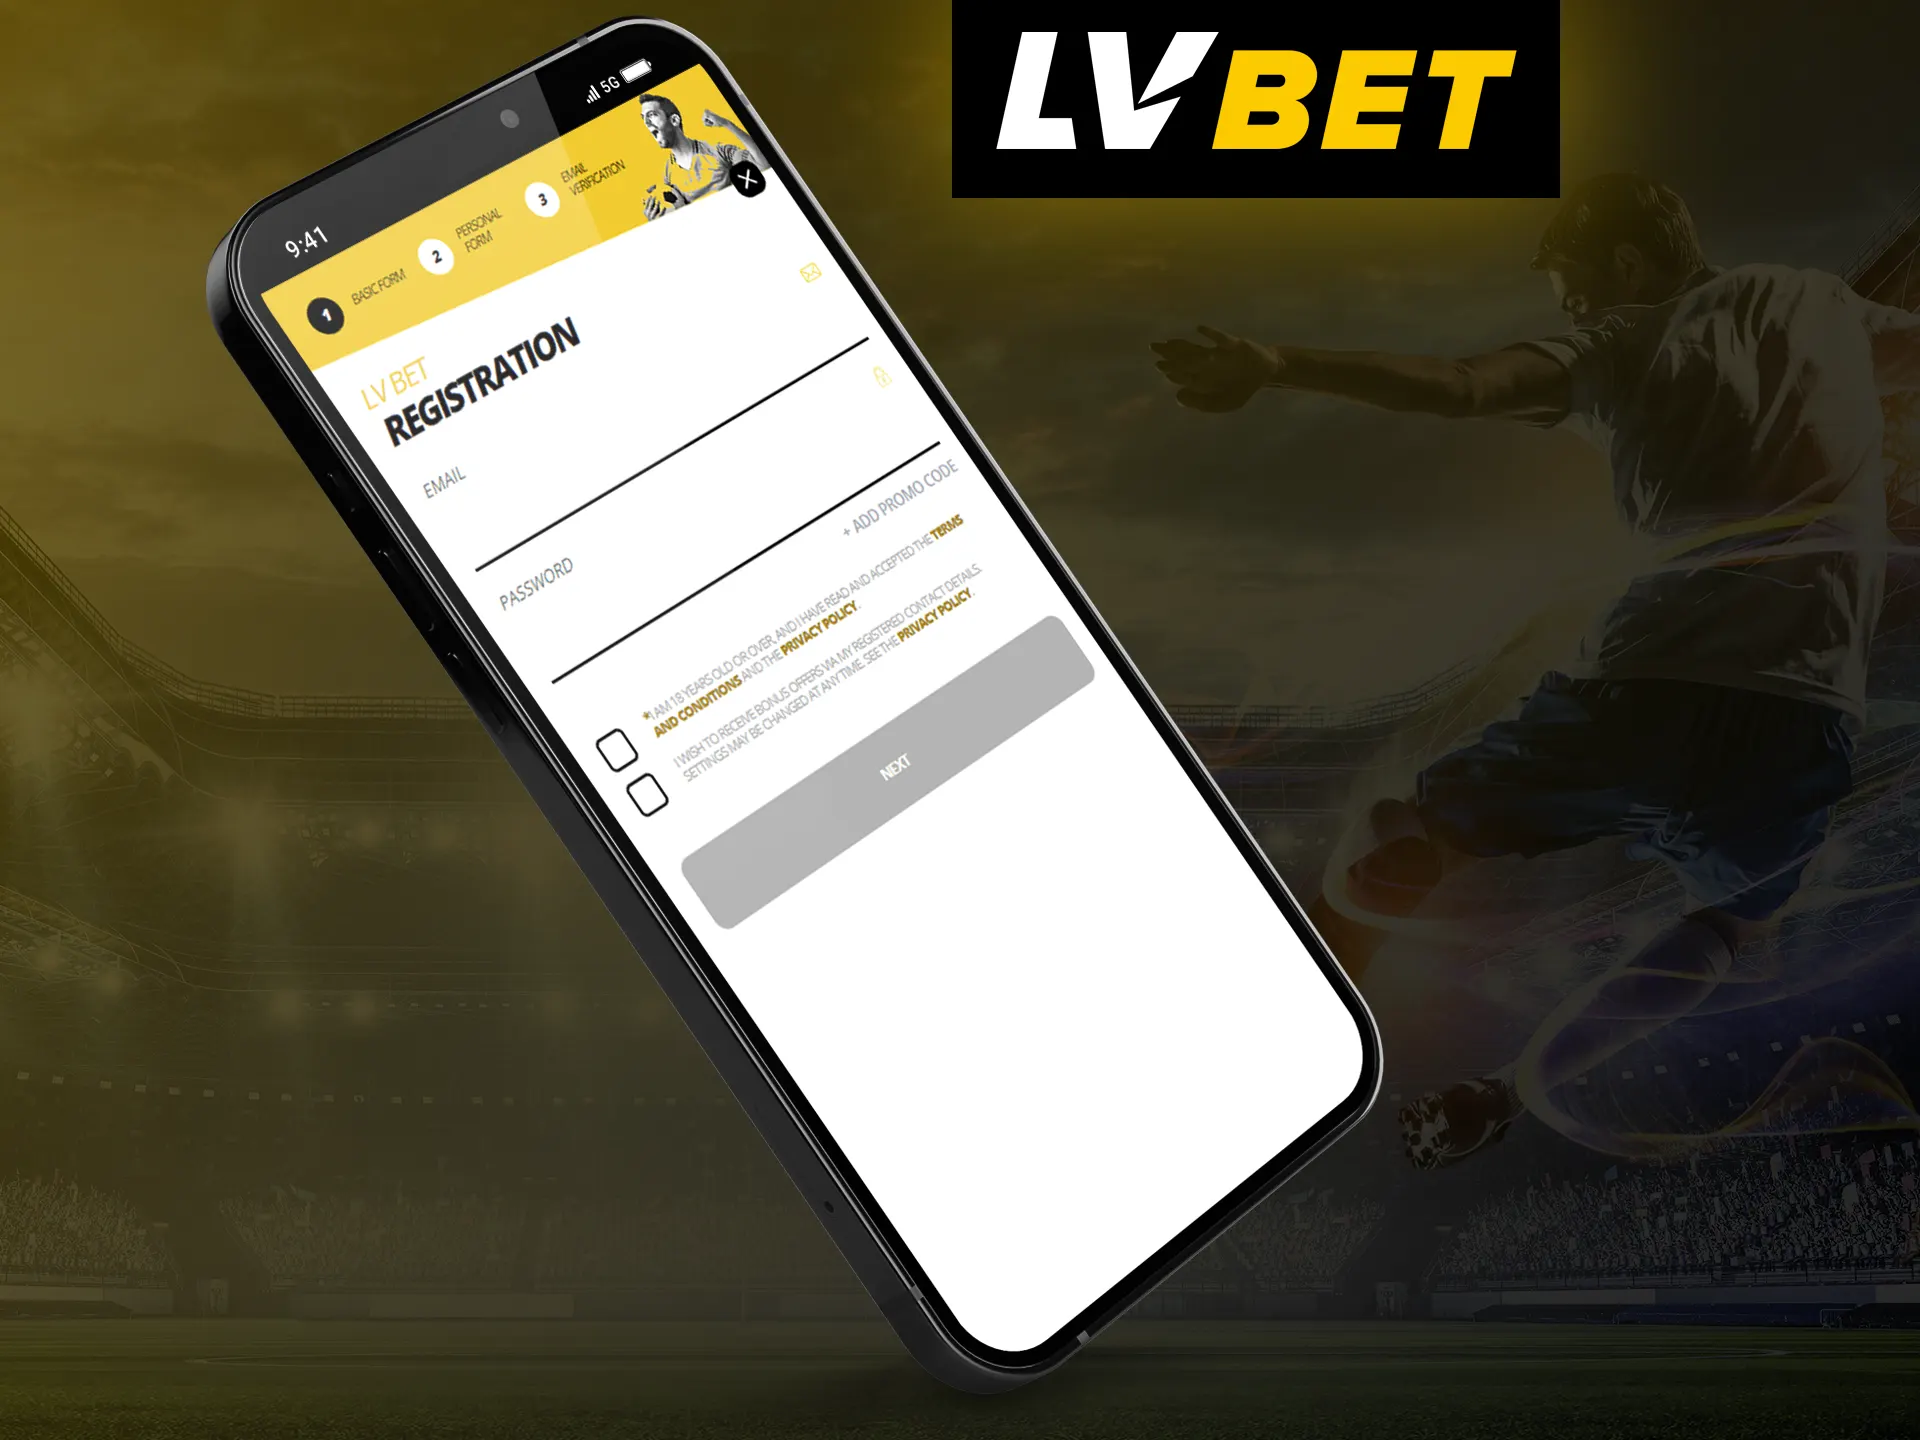 Complete a simple registration in the LV Bet app.